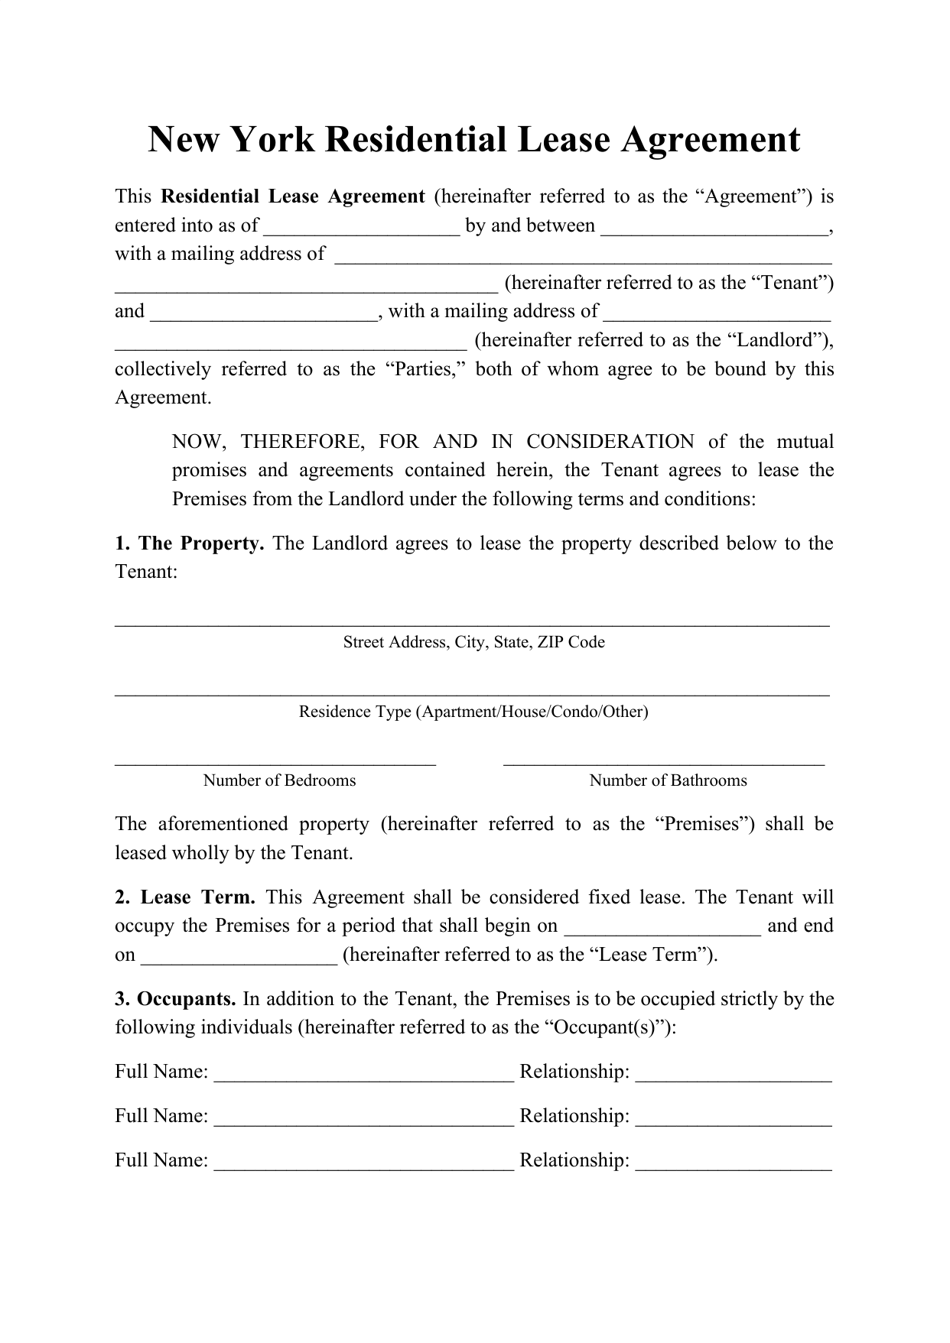 new-york-residential-lease-agreement-template-fill-out-sign-online